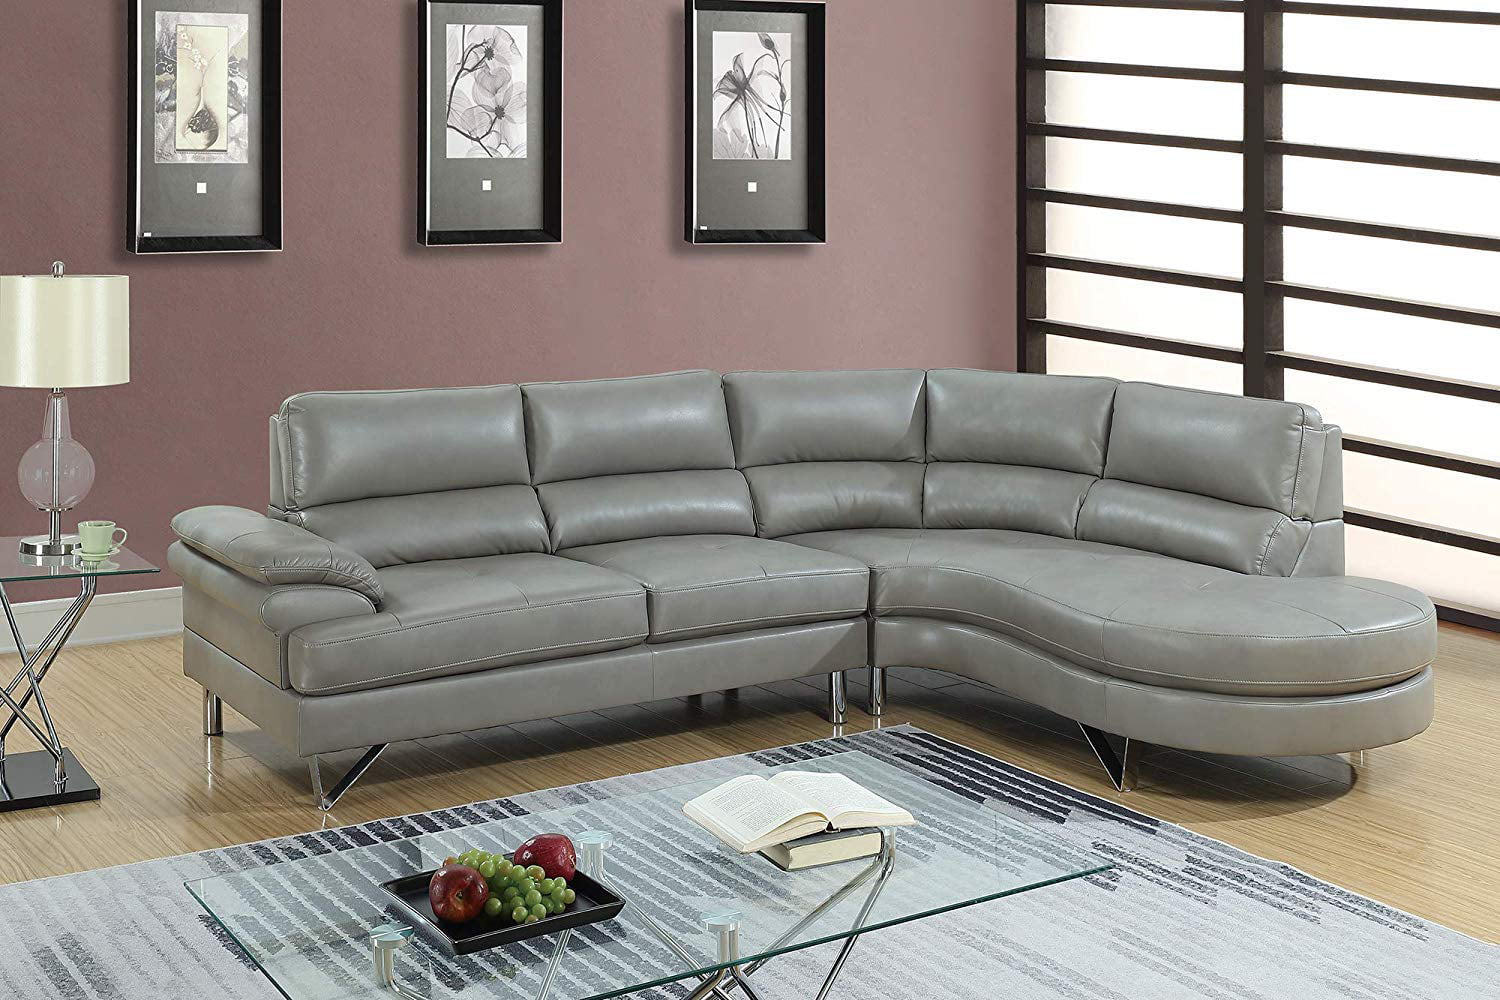 letherette sofa fouton beds